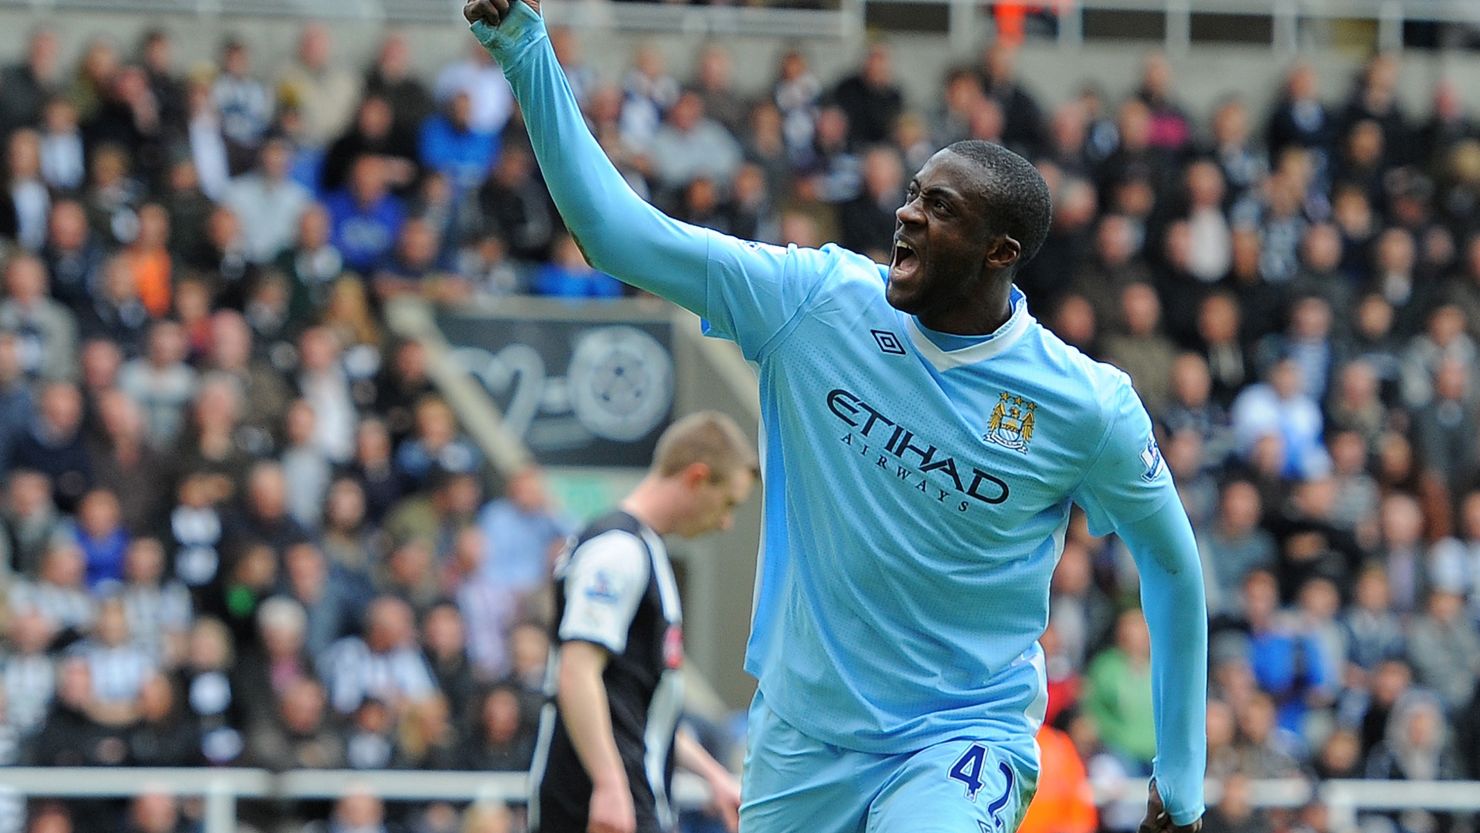 Manchester City midfielder Yaya Toure celebrates the two goals that could prove crucial in the EPL title race.